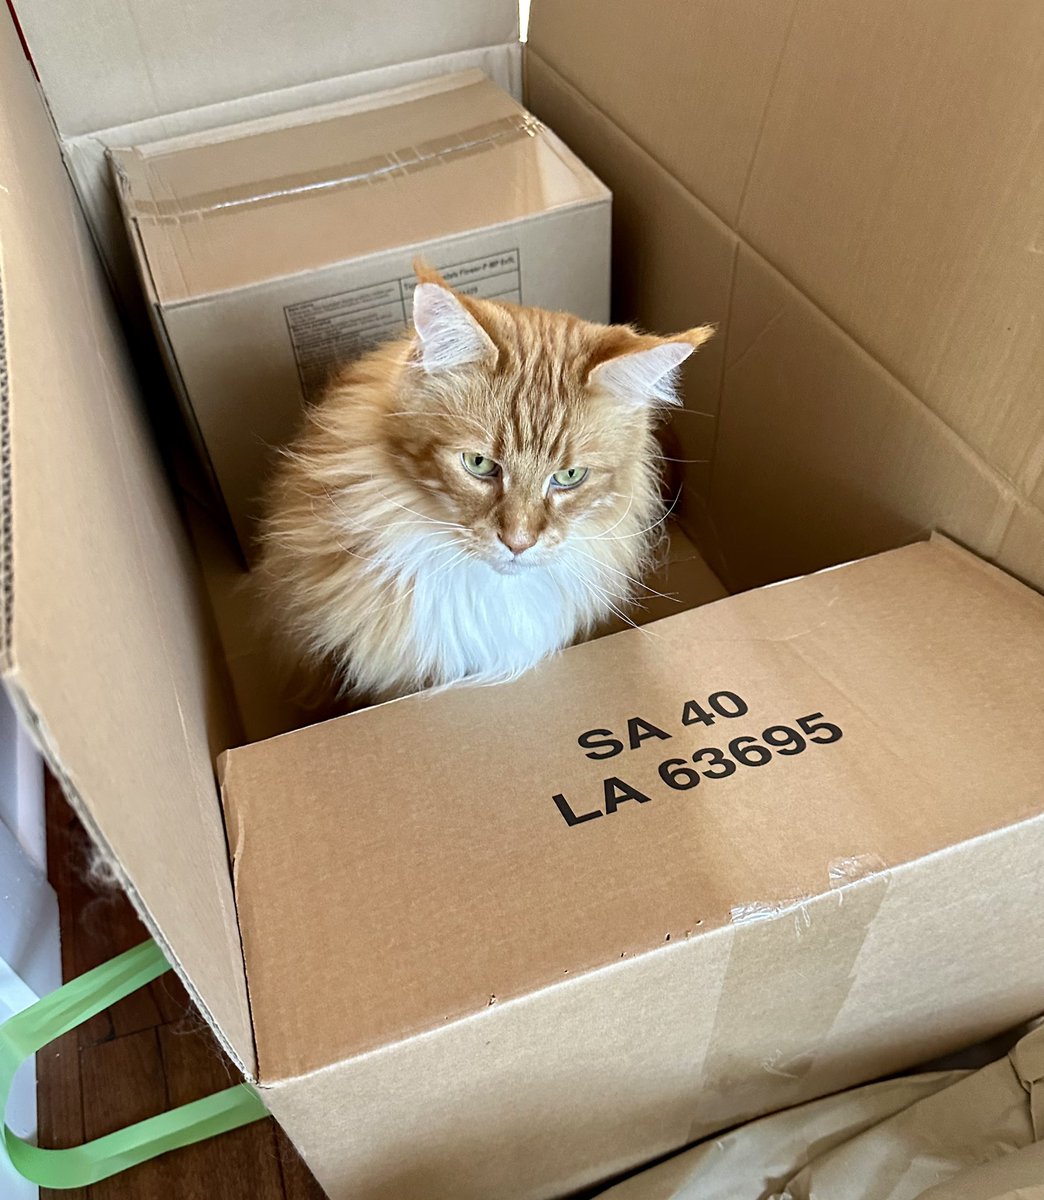 I had my doubts but this Gizmo statue we ordered has turned out really well 😹😹🦁🦁 #CatBoxSunday #teamfloof #CatsOfTwitter